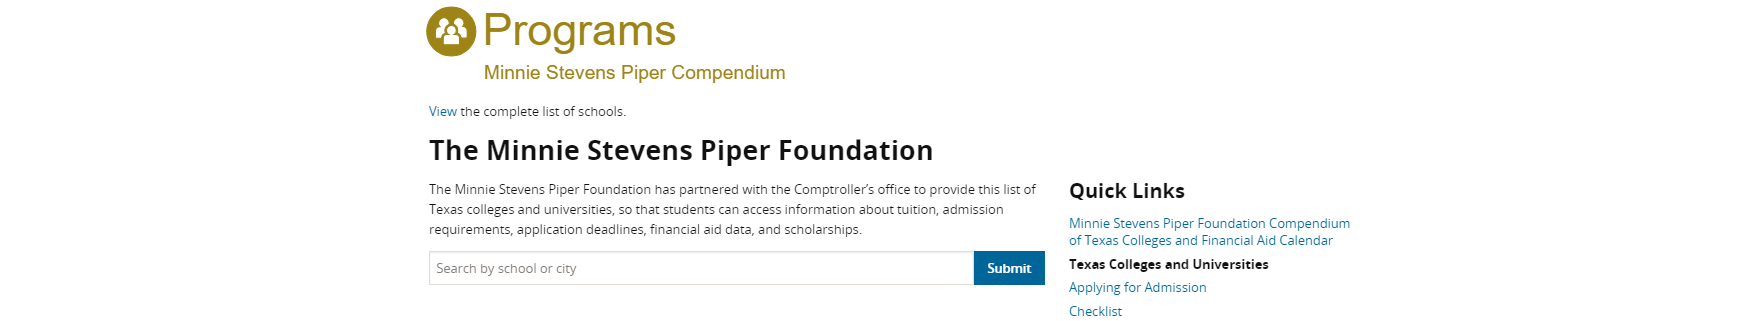 A screenshot of The Minnie Piper Foundation's website.